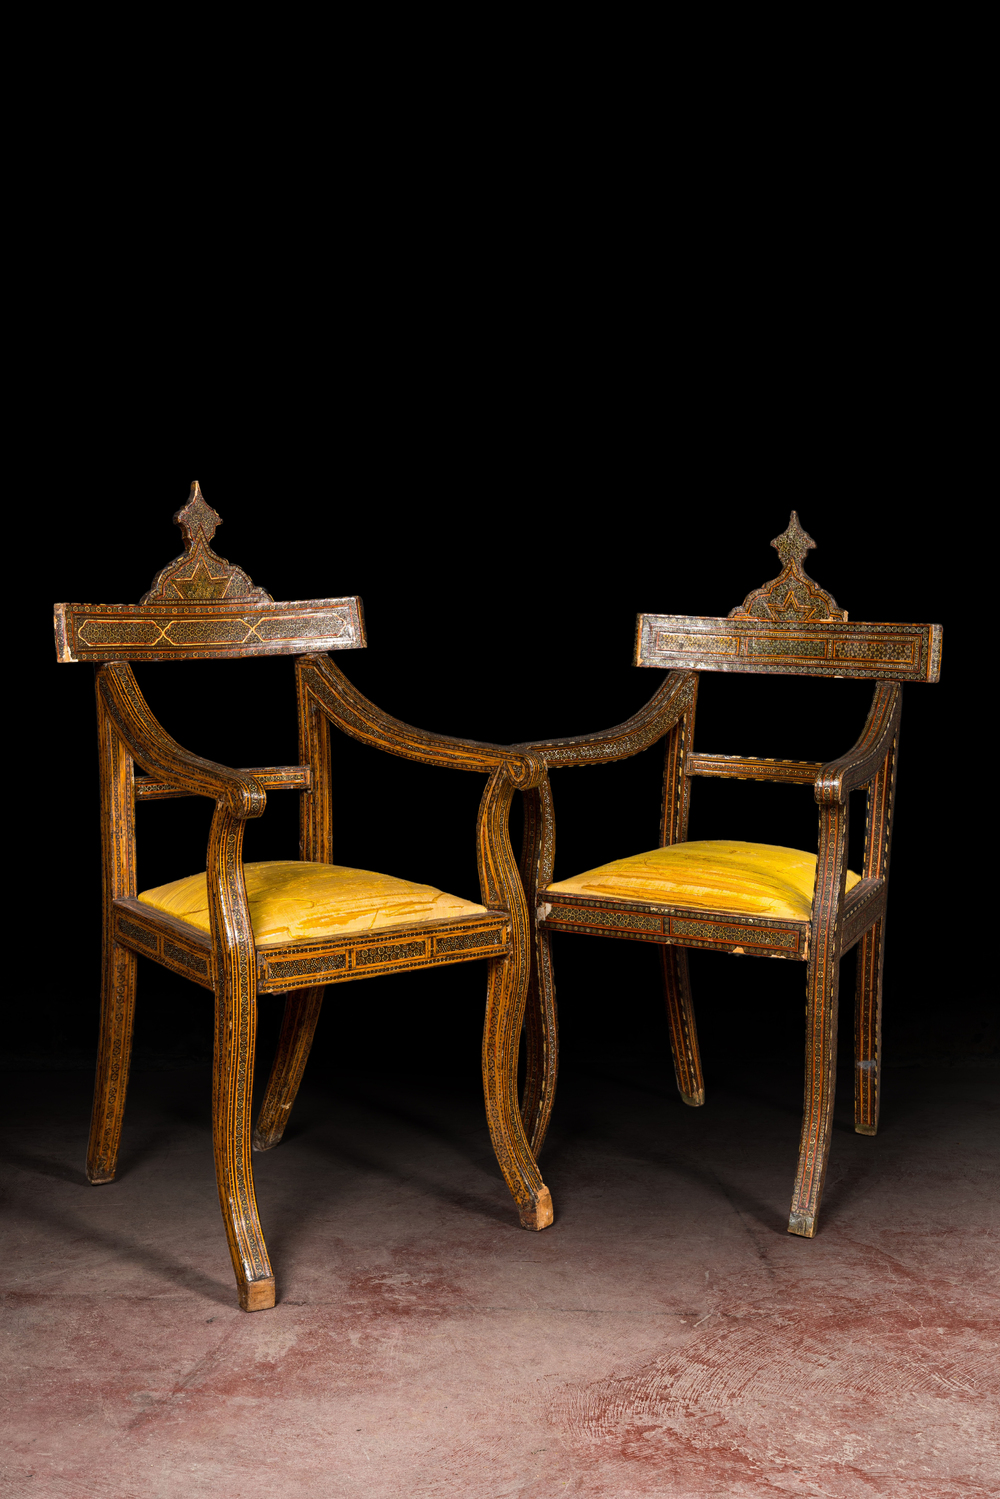 A pair of North African bone-inlaid wooden chairs with silk upholstery, 19th C